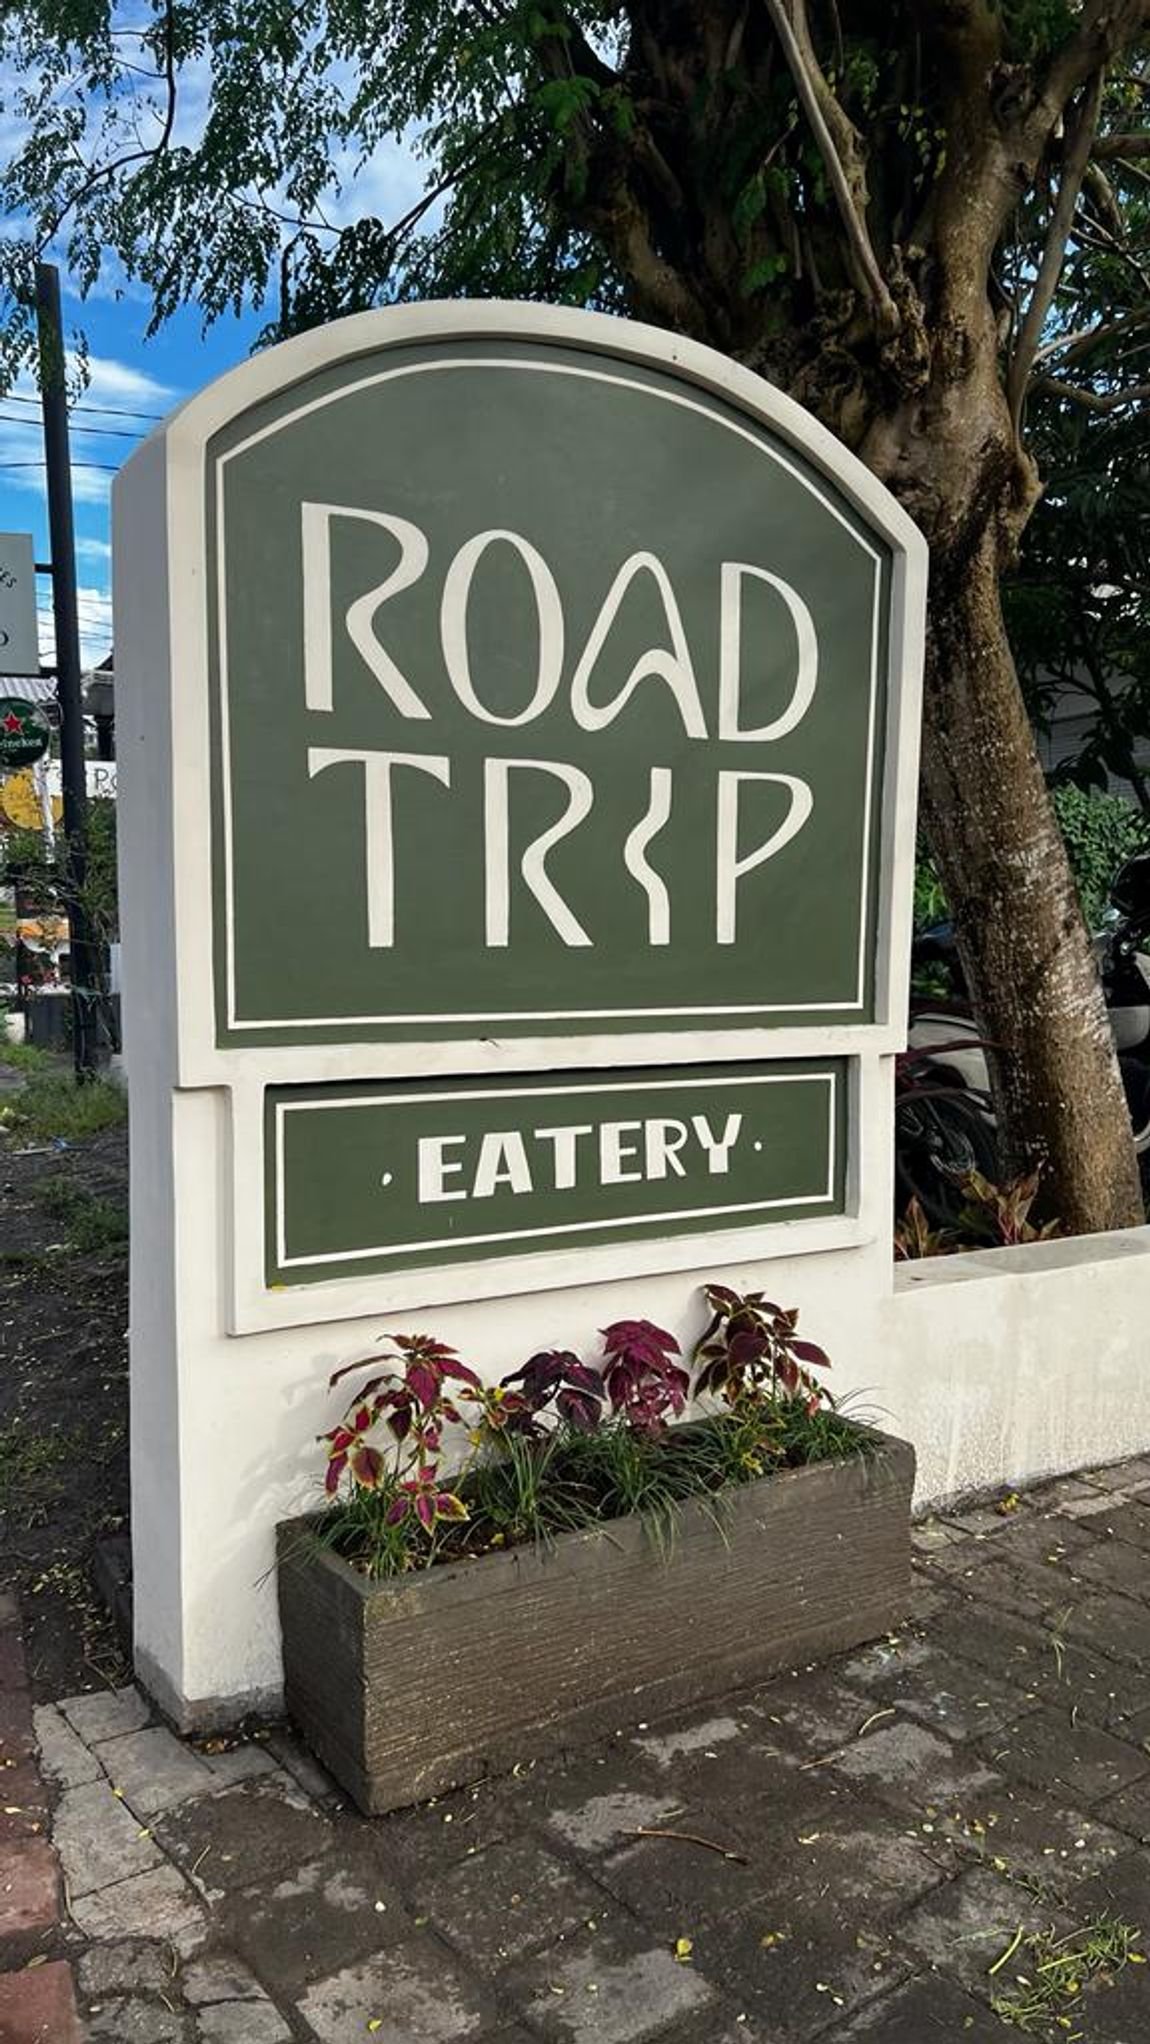 Road Trip Eatery